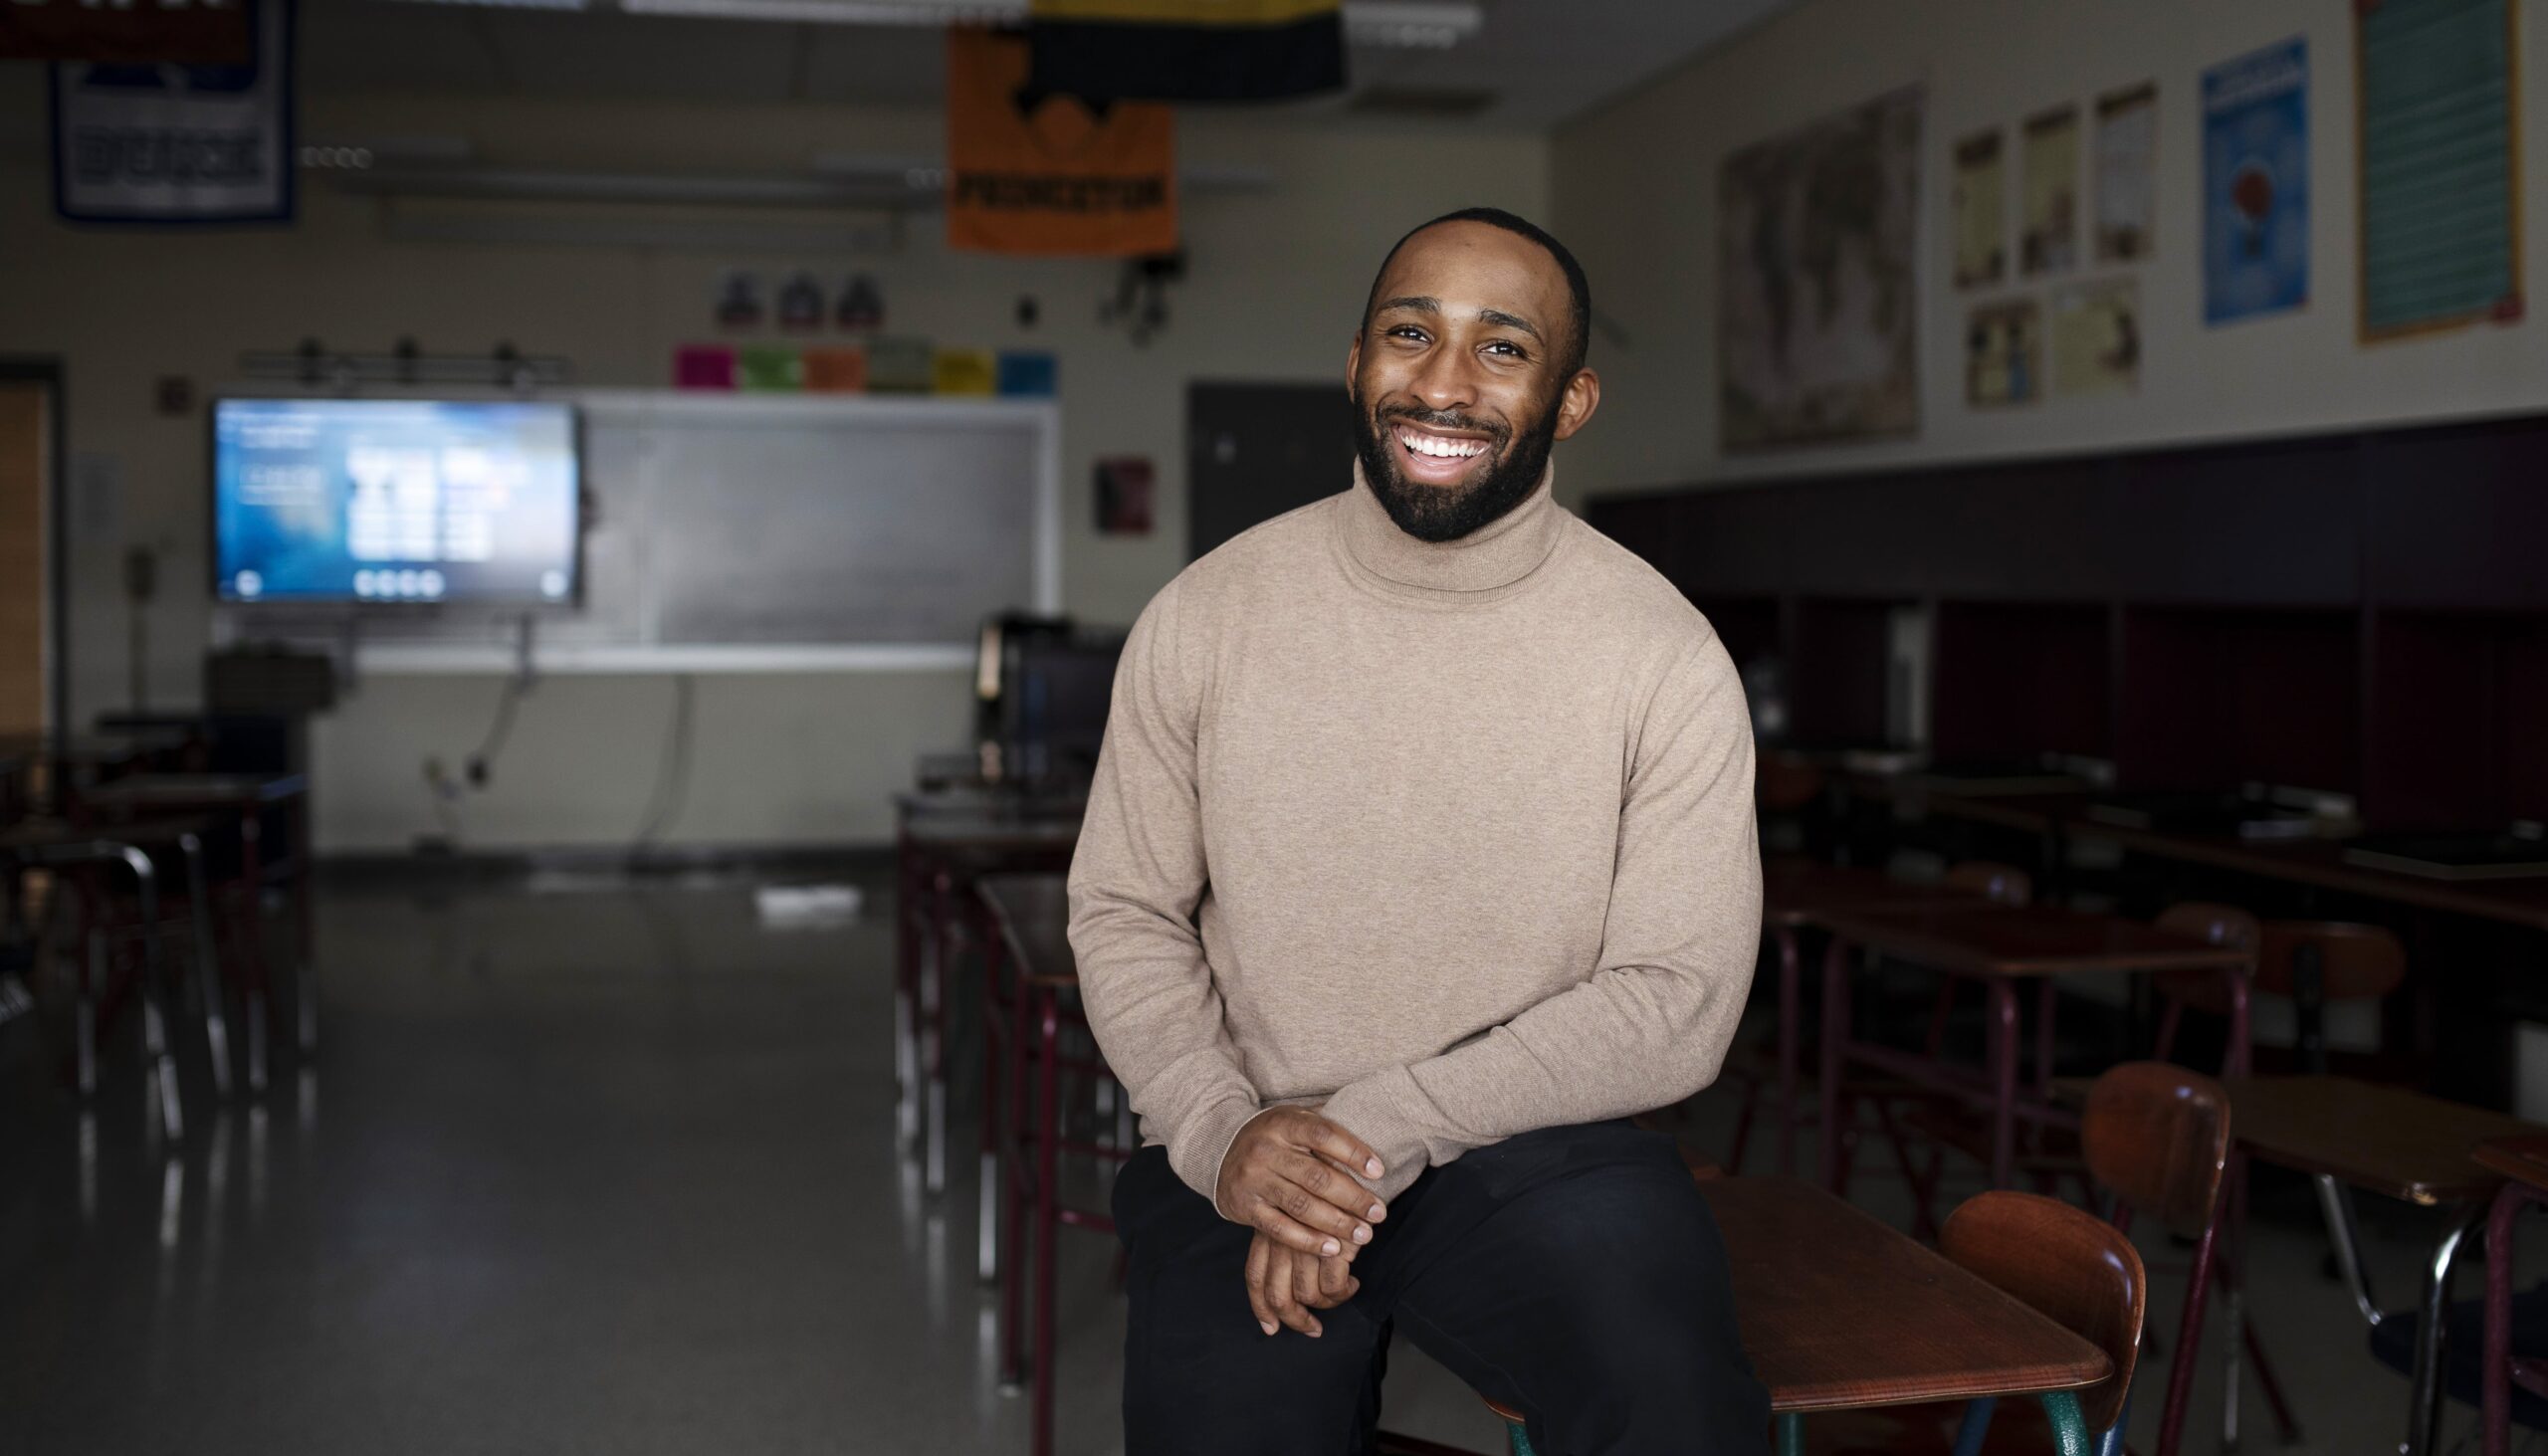 man in sweater stands in a classroom